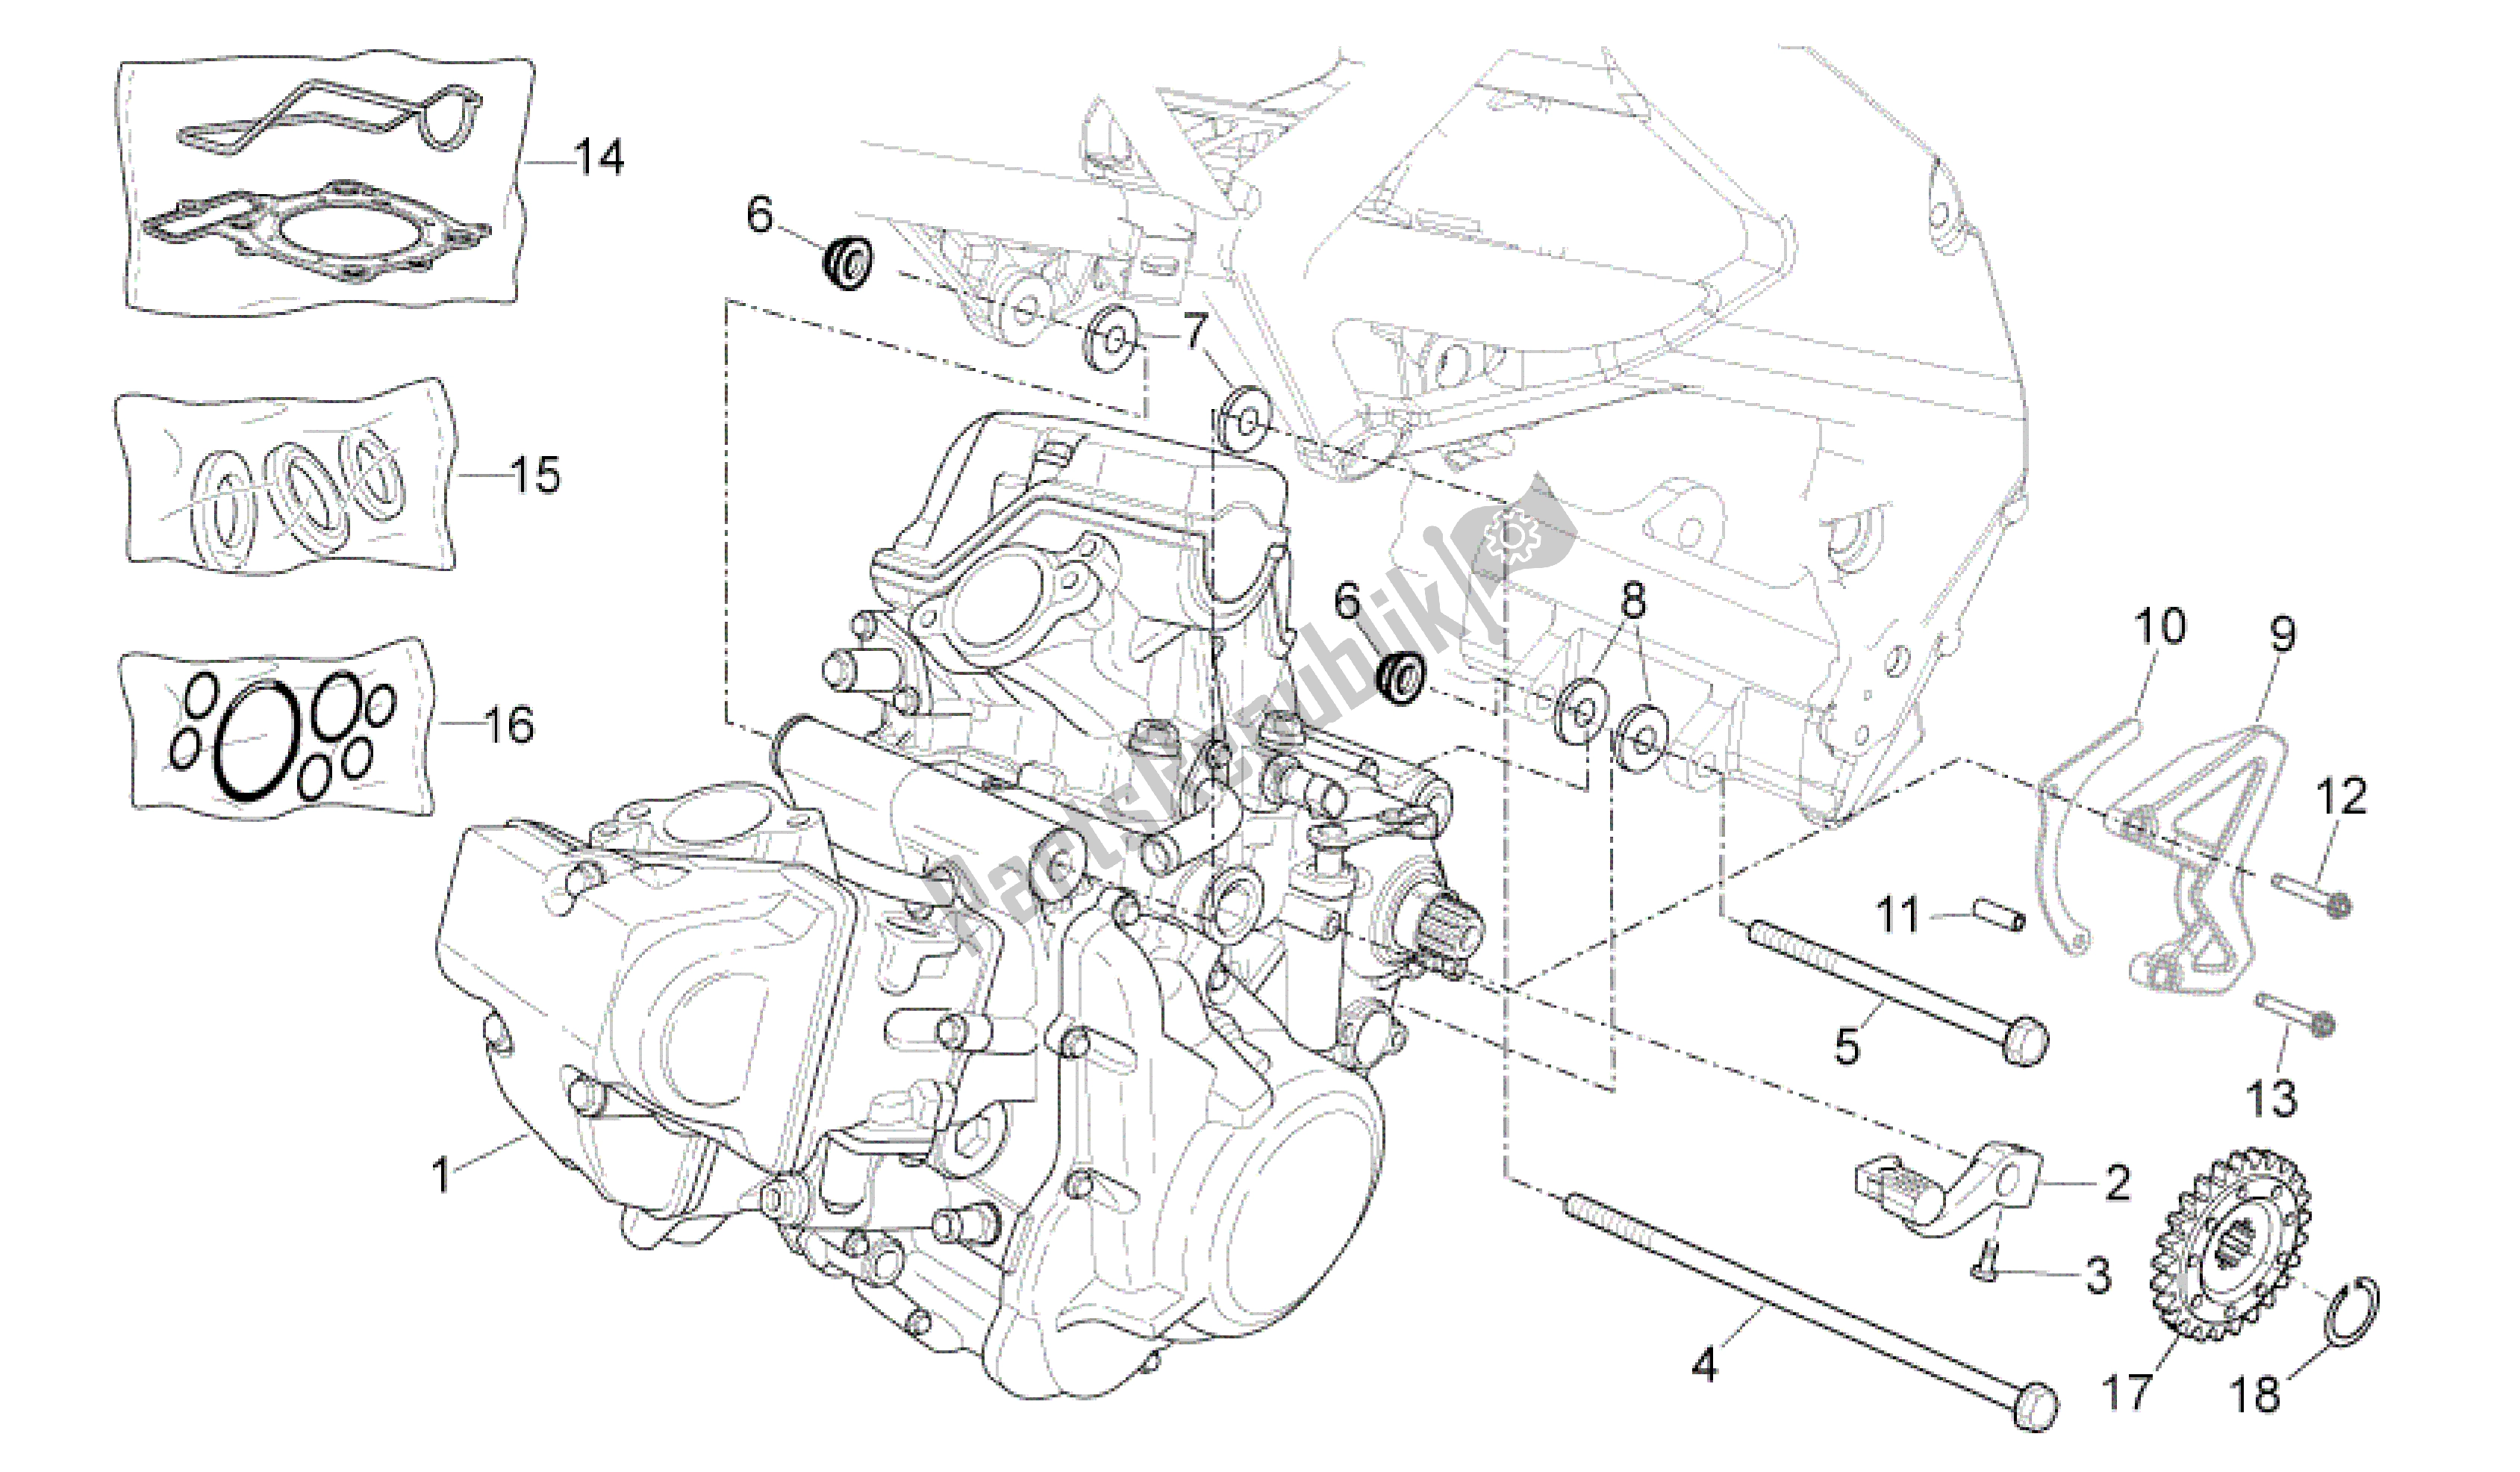 All parts for the Engine of the Aprilia RXV 450 2009 - 2011